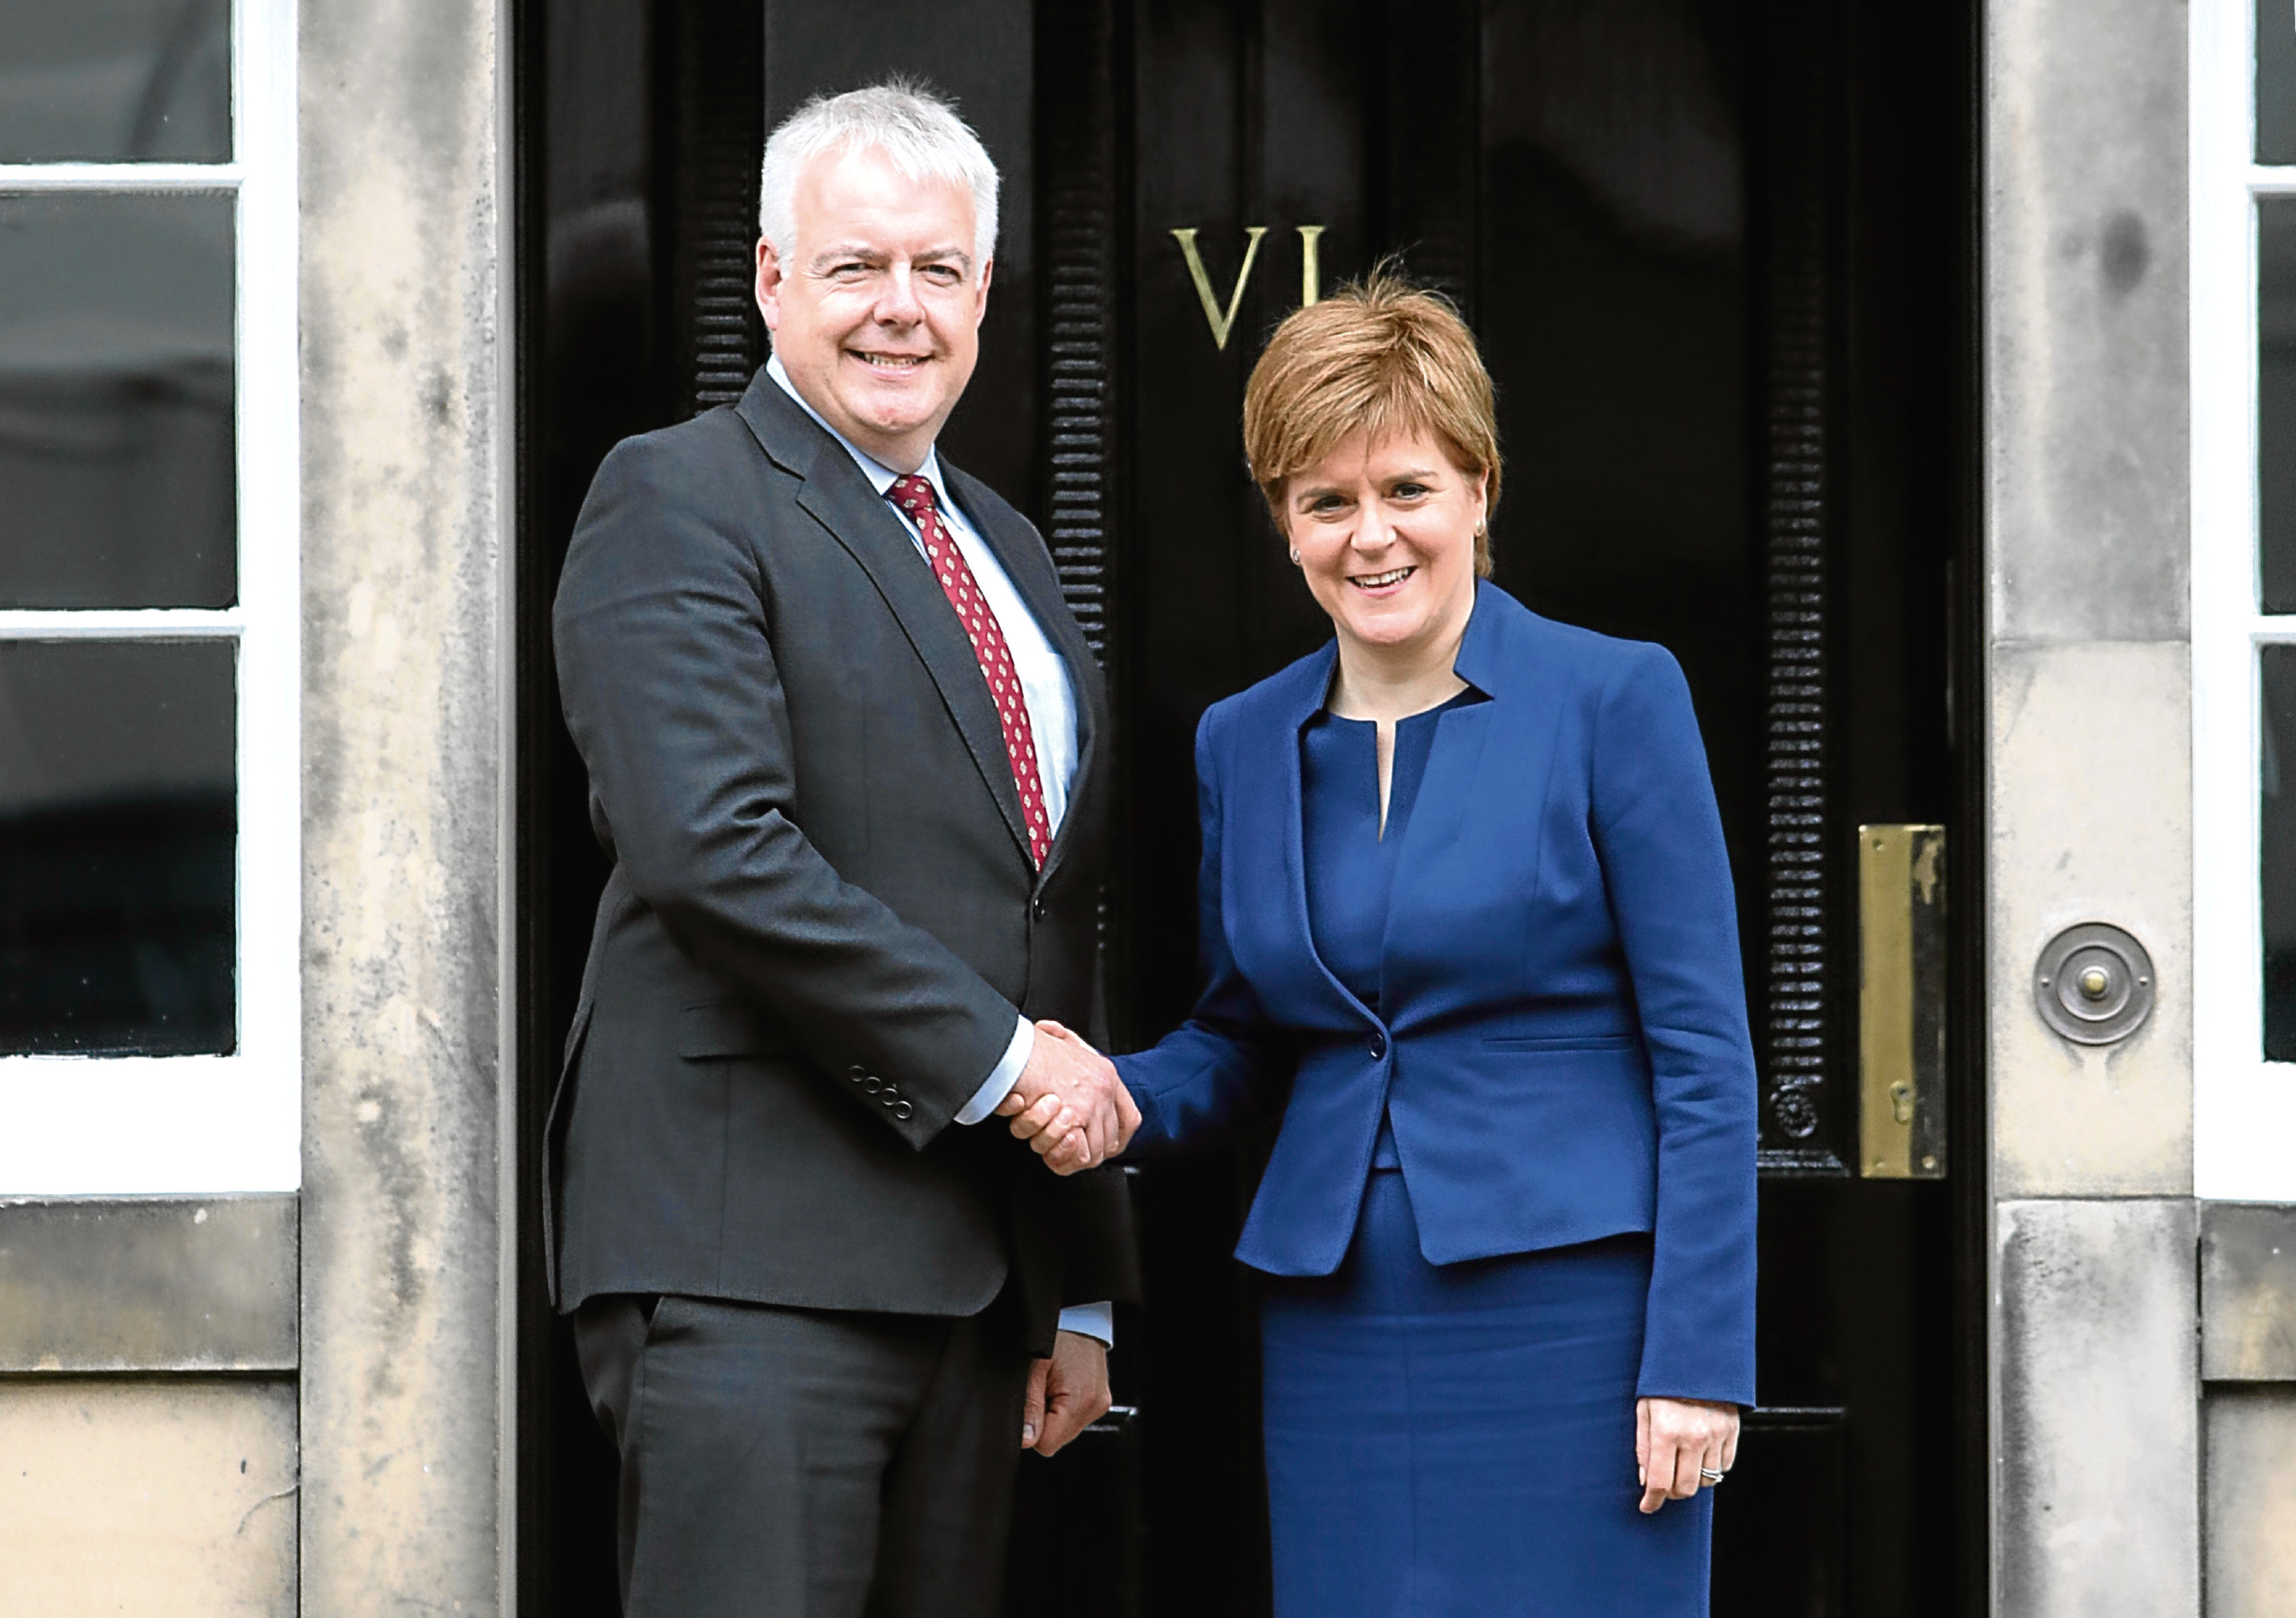 First Minister of Scotland Nicola Sturgeon and First Minister of Wales Carwyn Jones meet on the steps of Bute House in Edinburgh where they will discuss how the two Governments can work together to protect devolution. Aug 22 2017